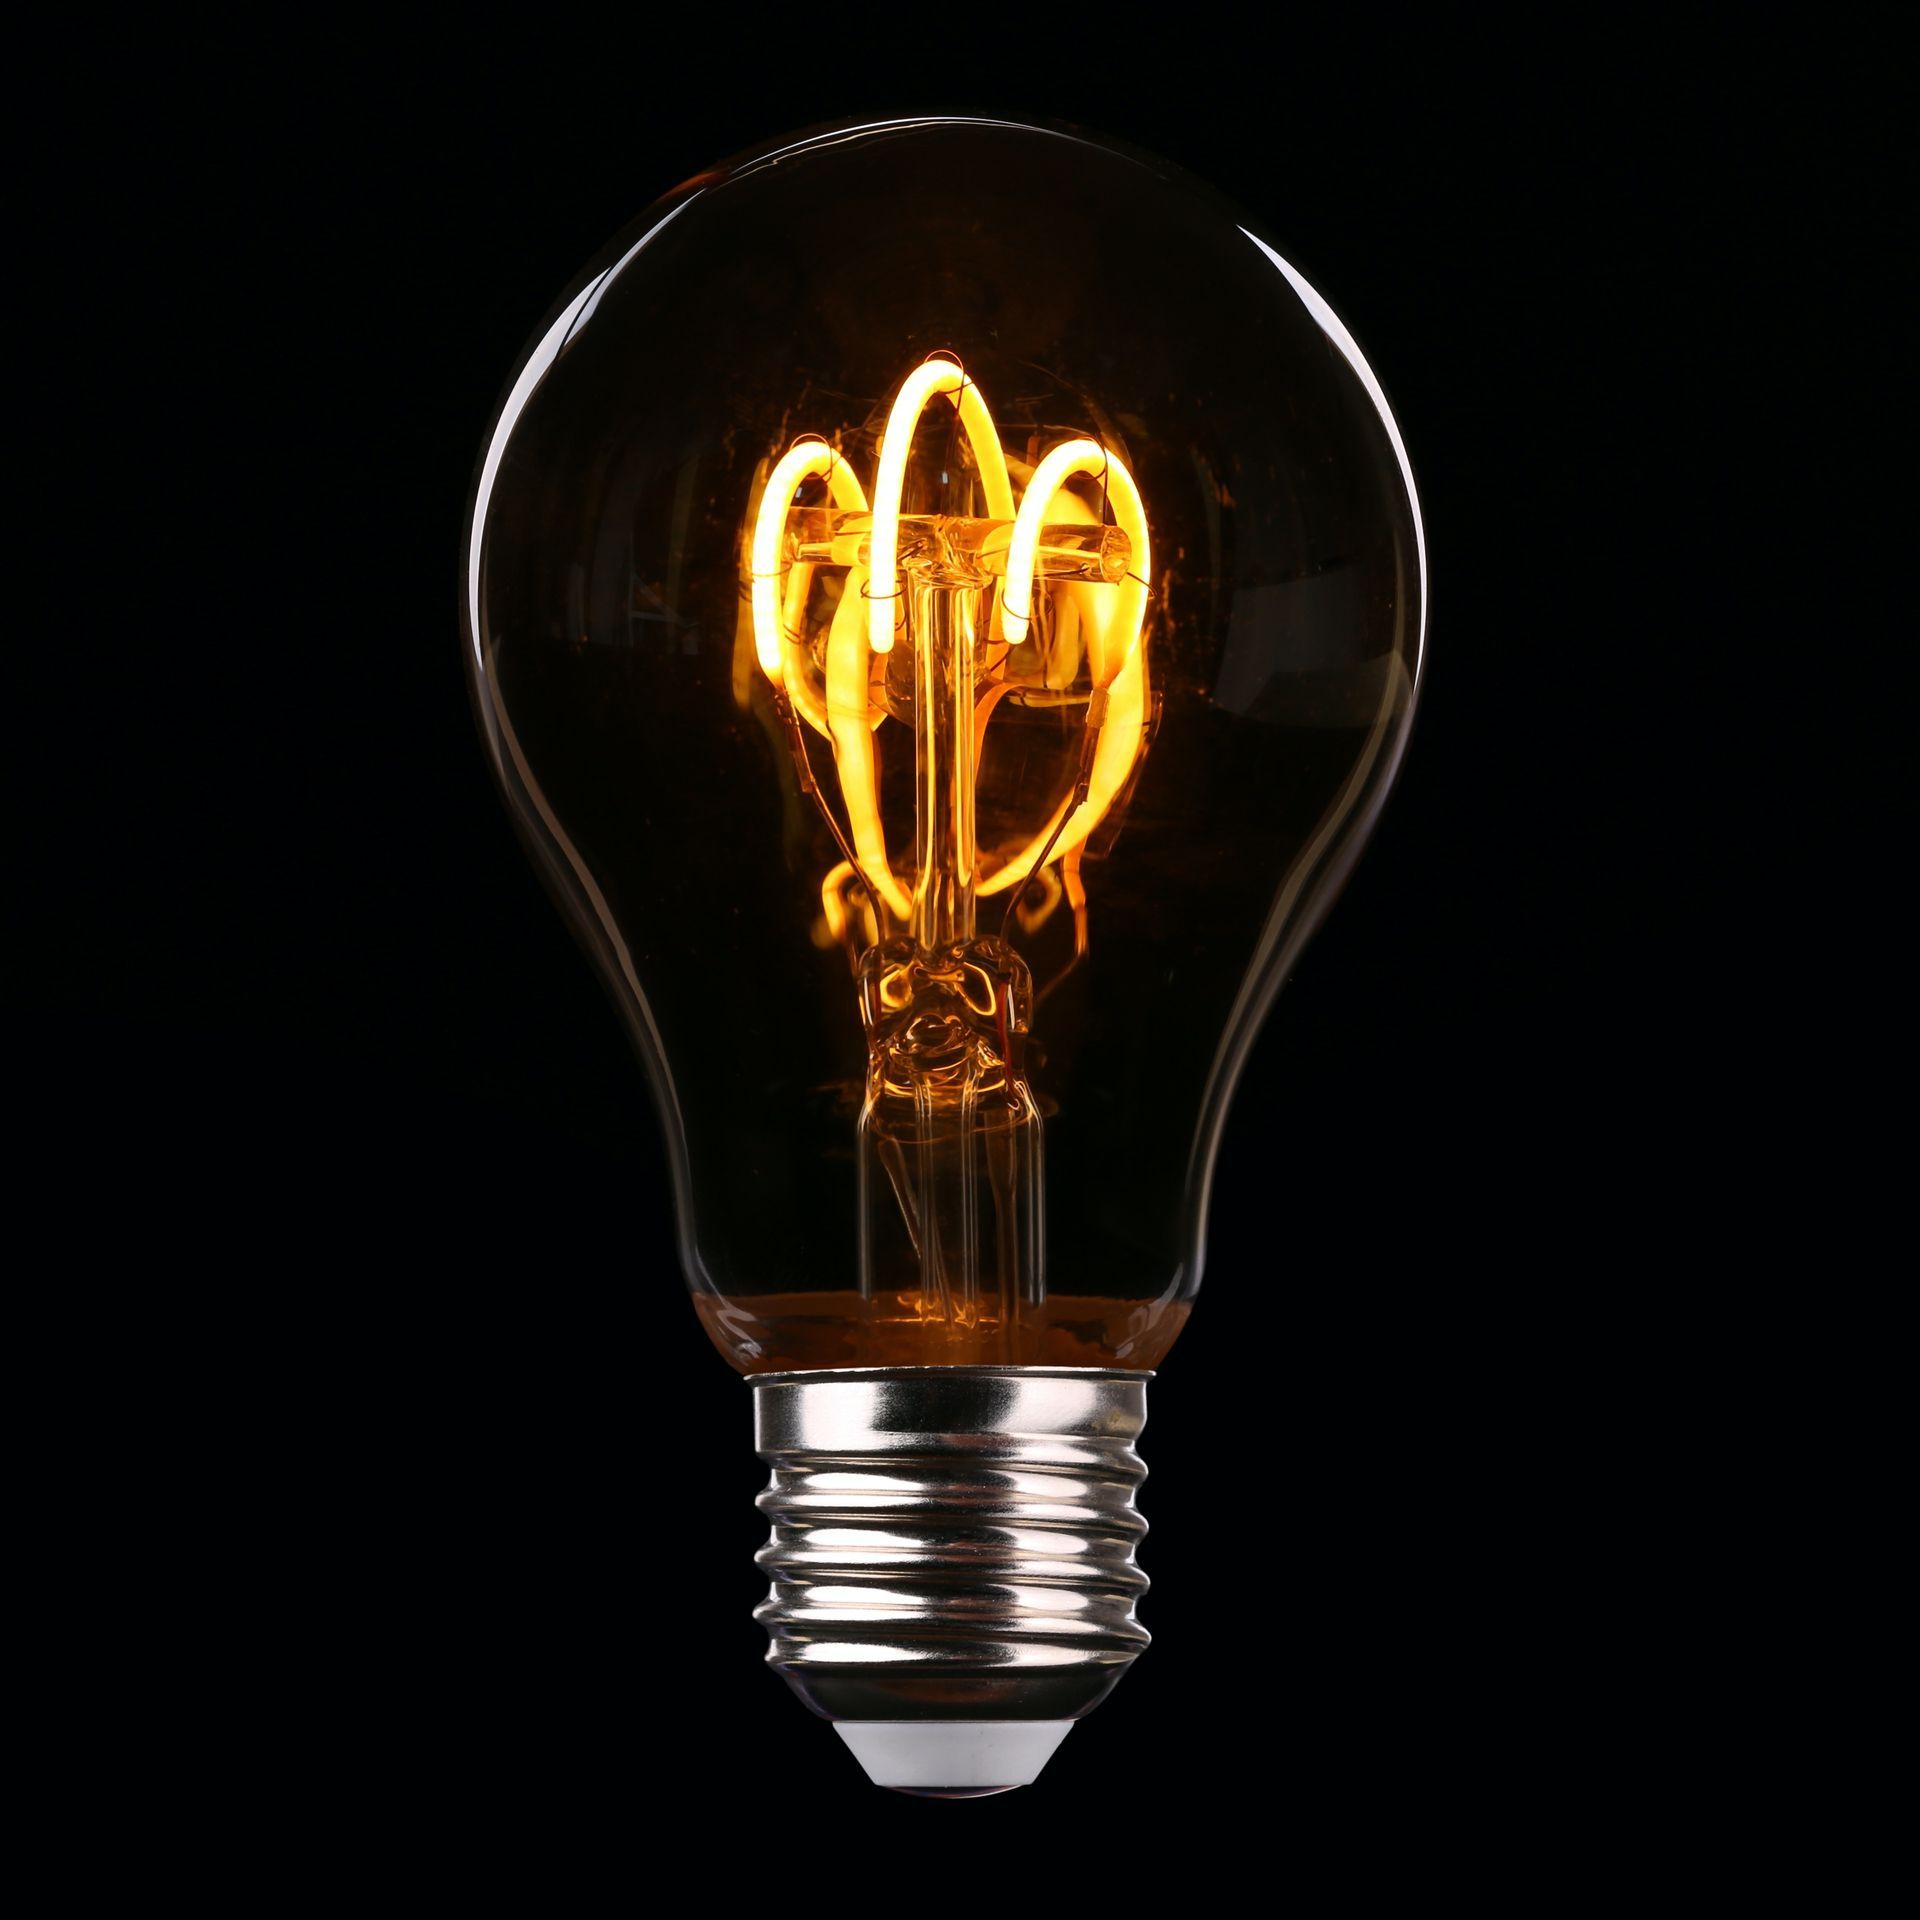 A lightbulb with a glowing filament set on a black background